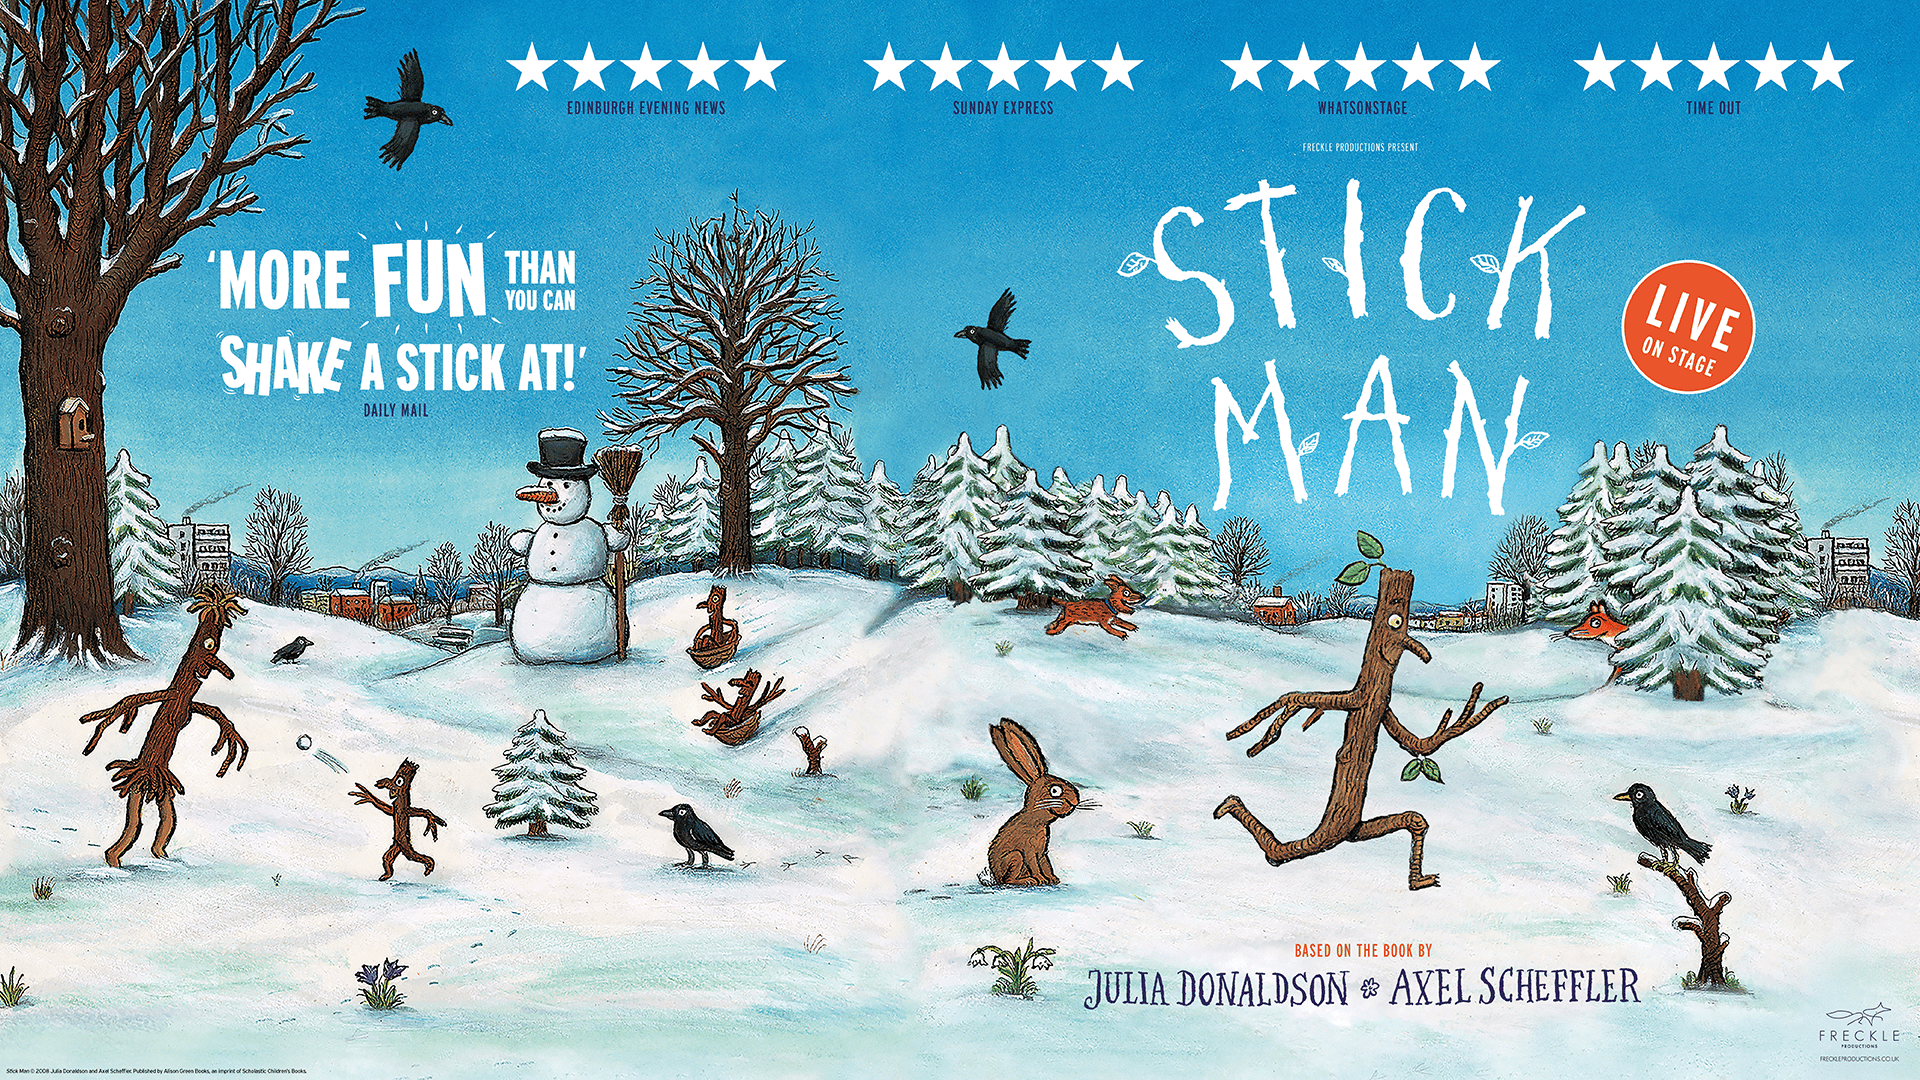 Stick Man illustration as in the books.